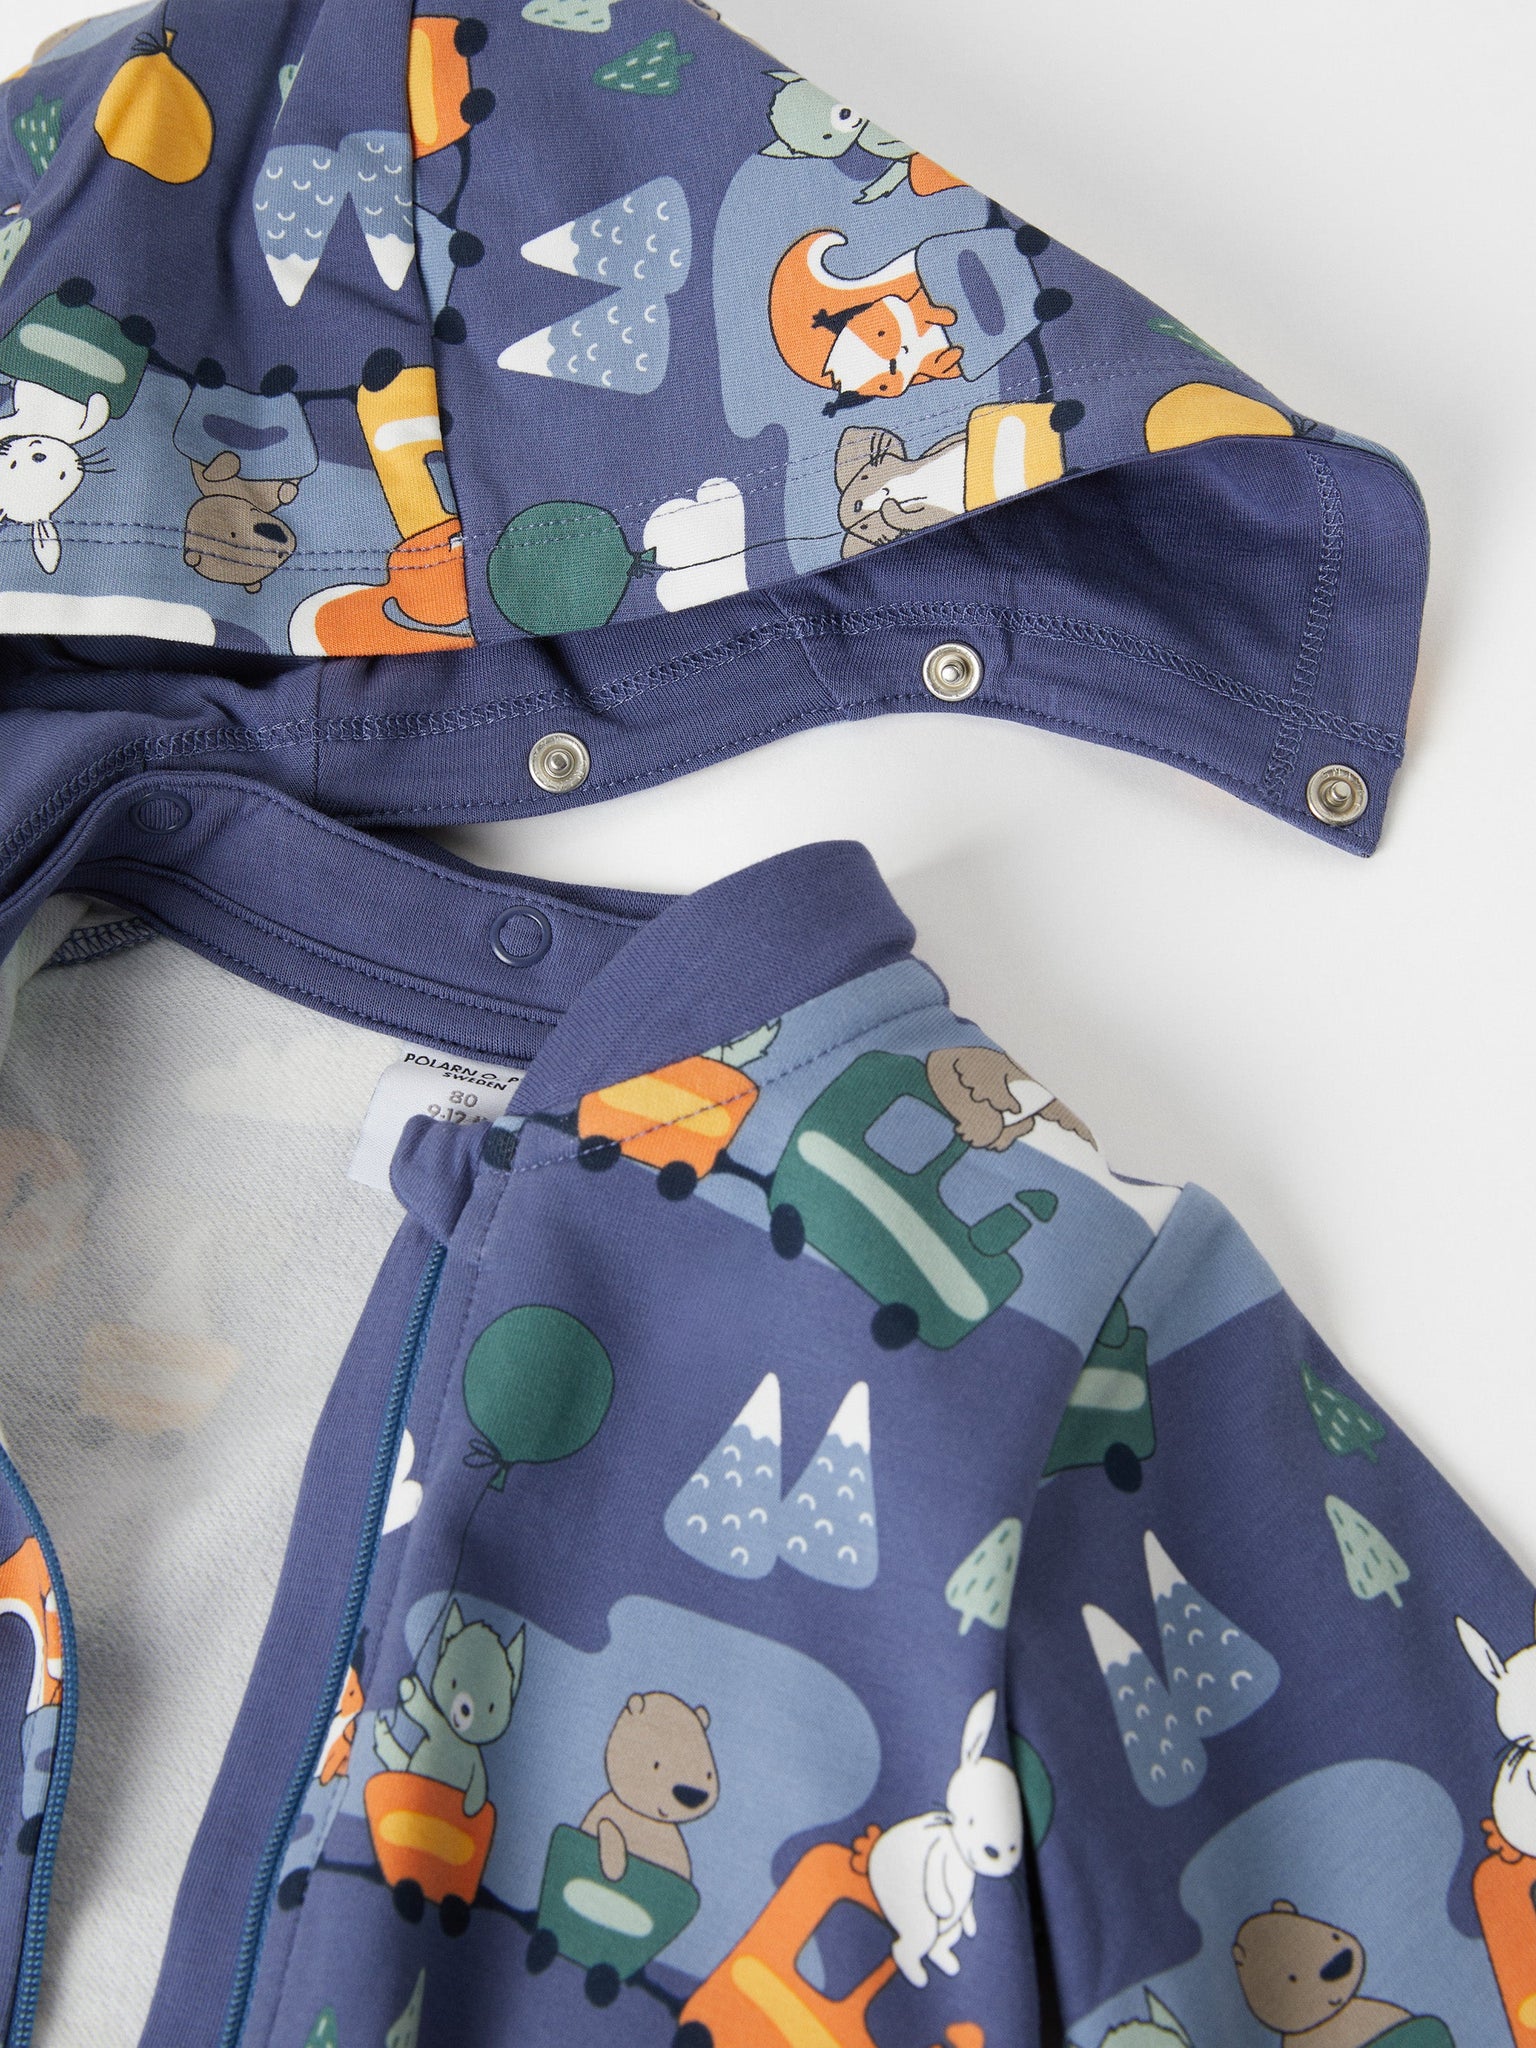 Animal Print Cotton Baby All-In-One from the Polarn O. Pyret baby collection. Nordic baby clothes made from sustainable sources.